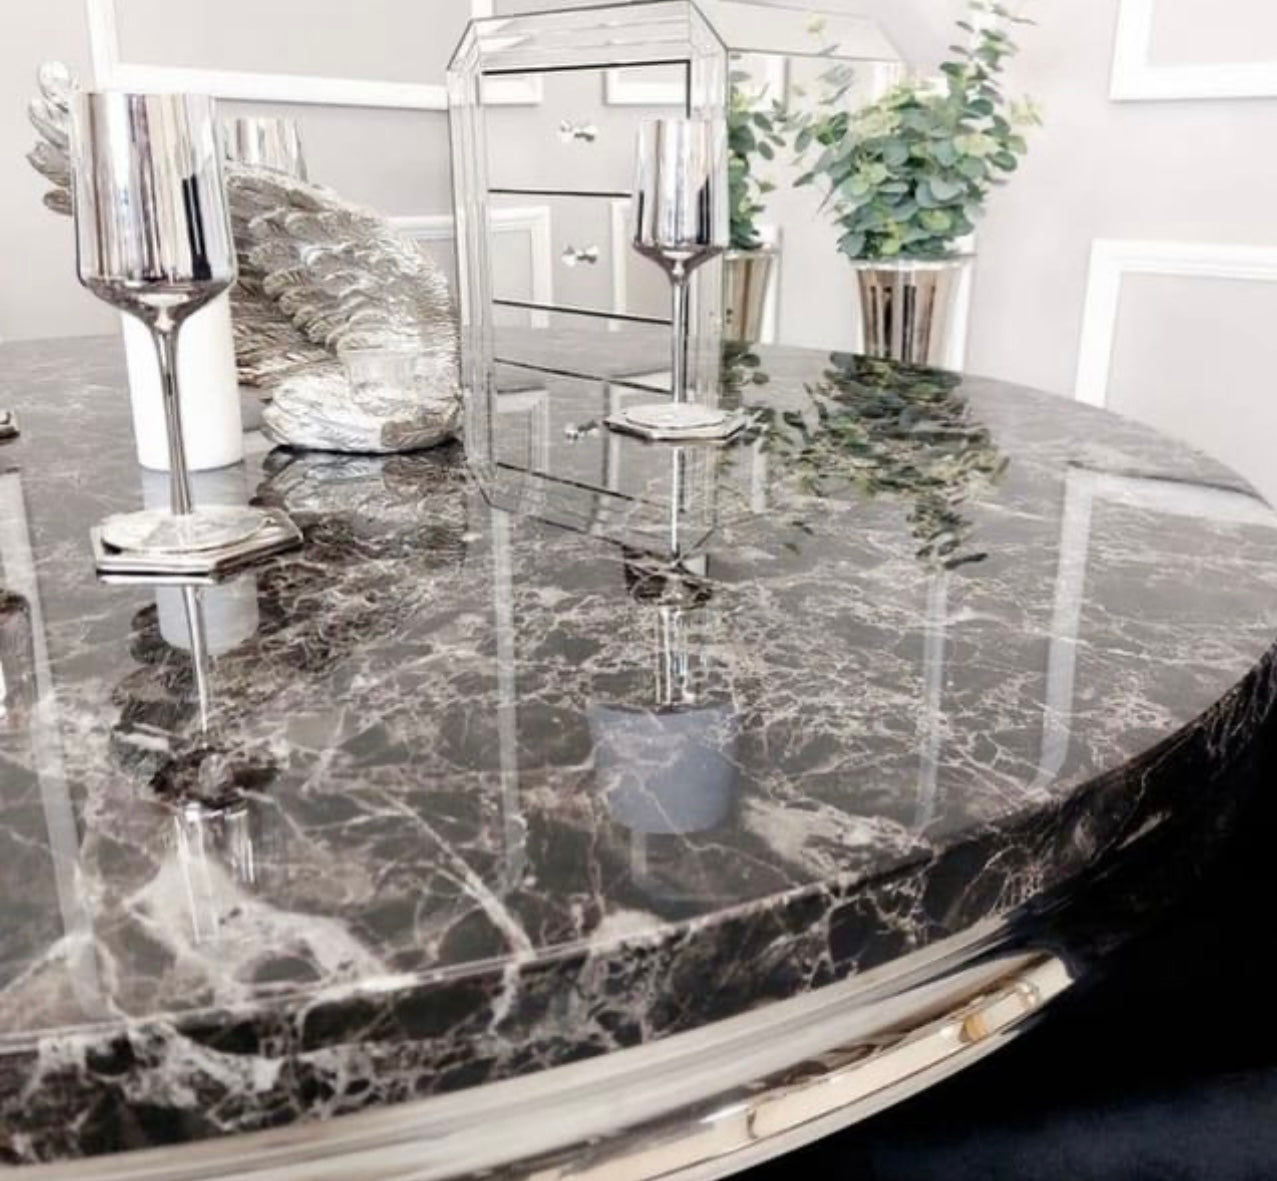 Louis 130cm black marble dining table with Mayfair lion knocker chairs